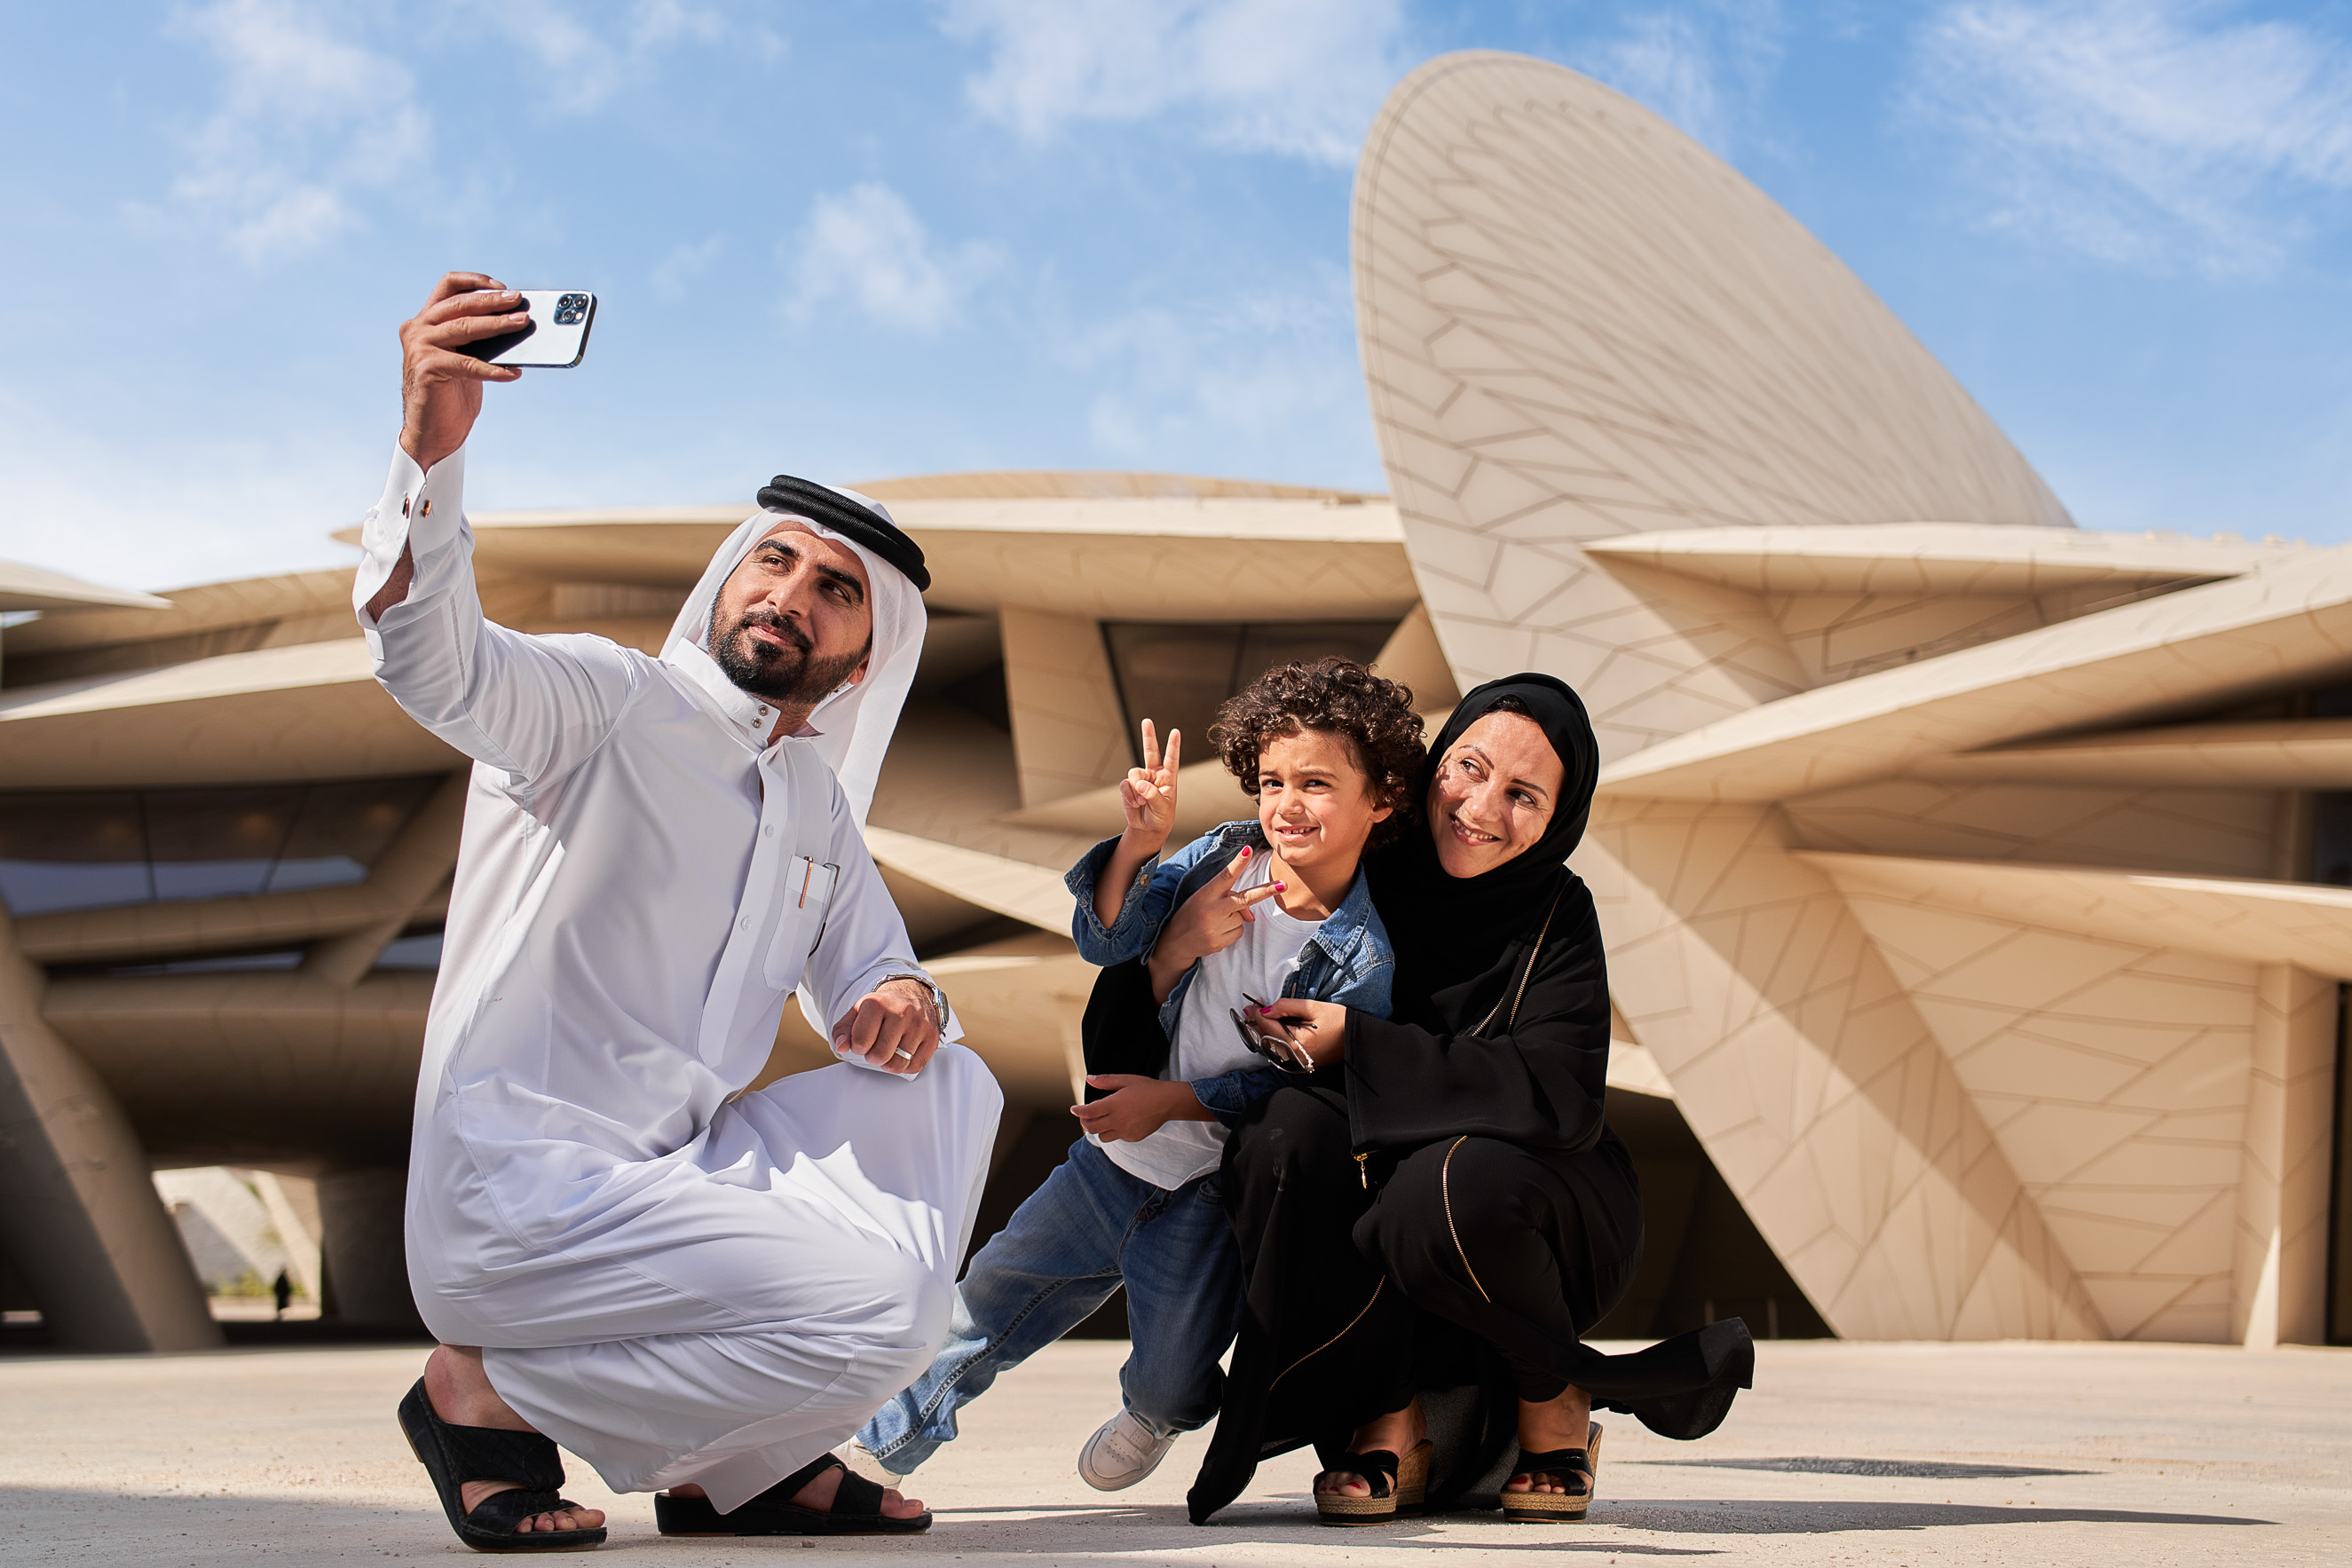 Top 5 city activities for your Qatar stopover